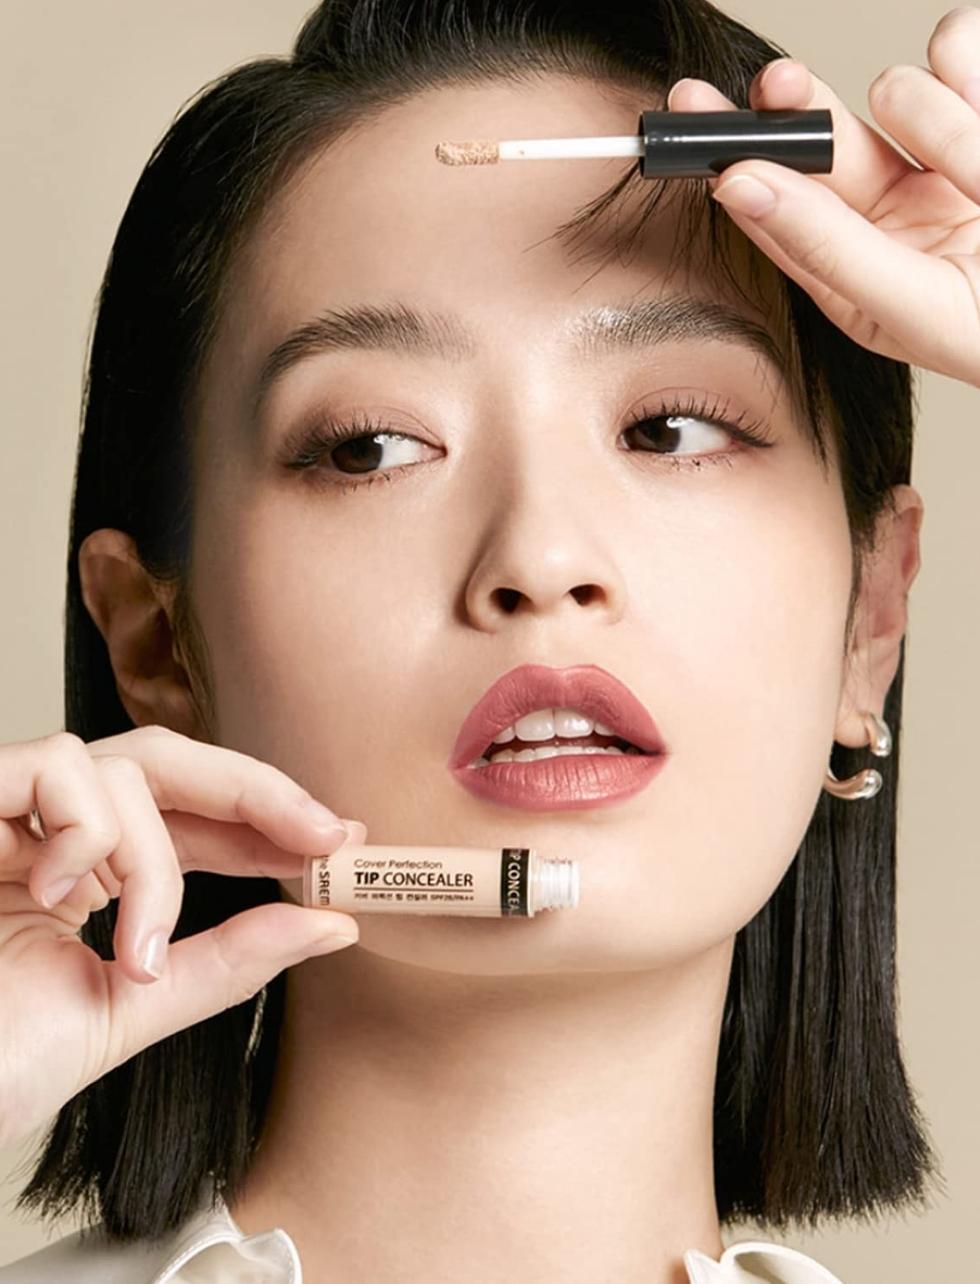 The Saem Cover Perfection Tip Concealer: Flawless Coverage, Long-lasting Formula, Makeup Must-Have